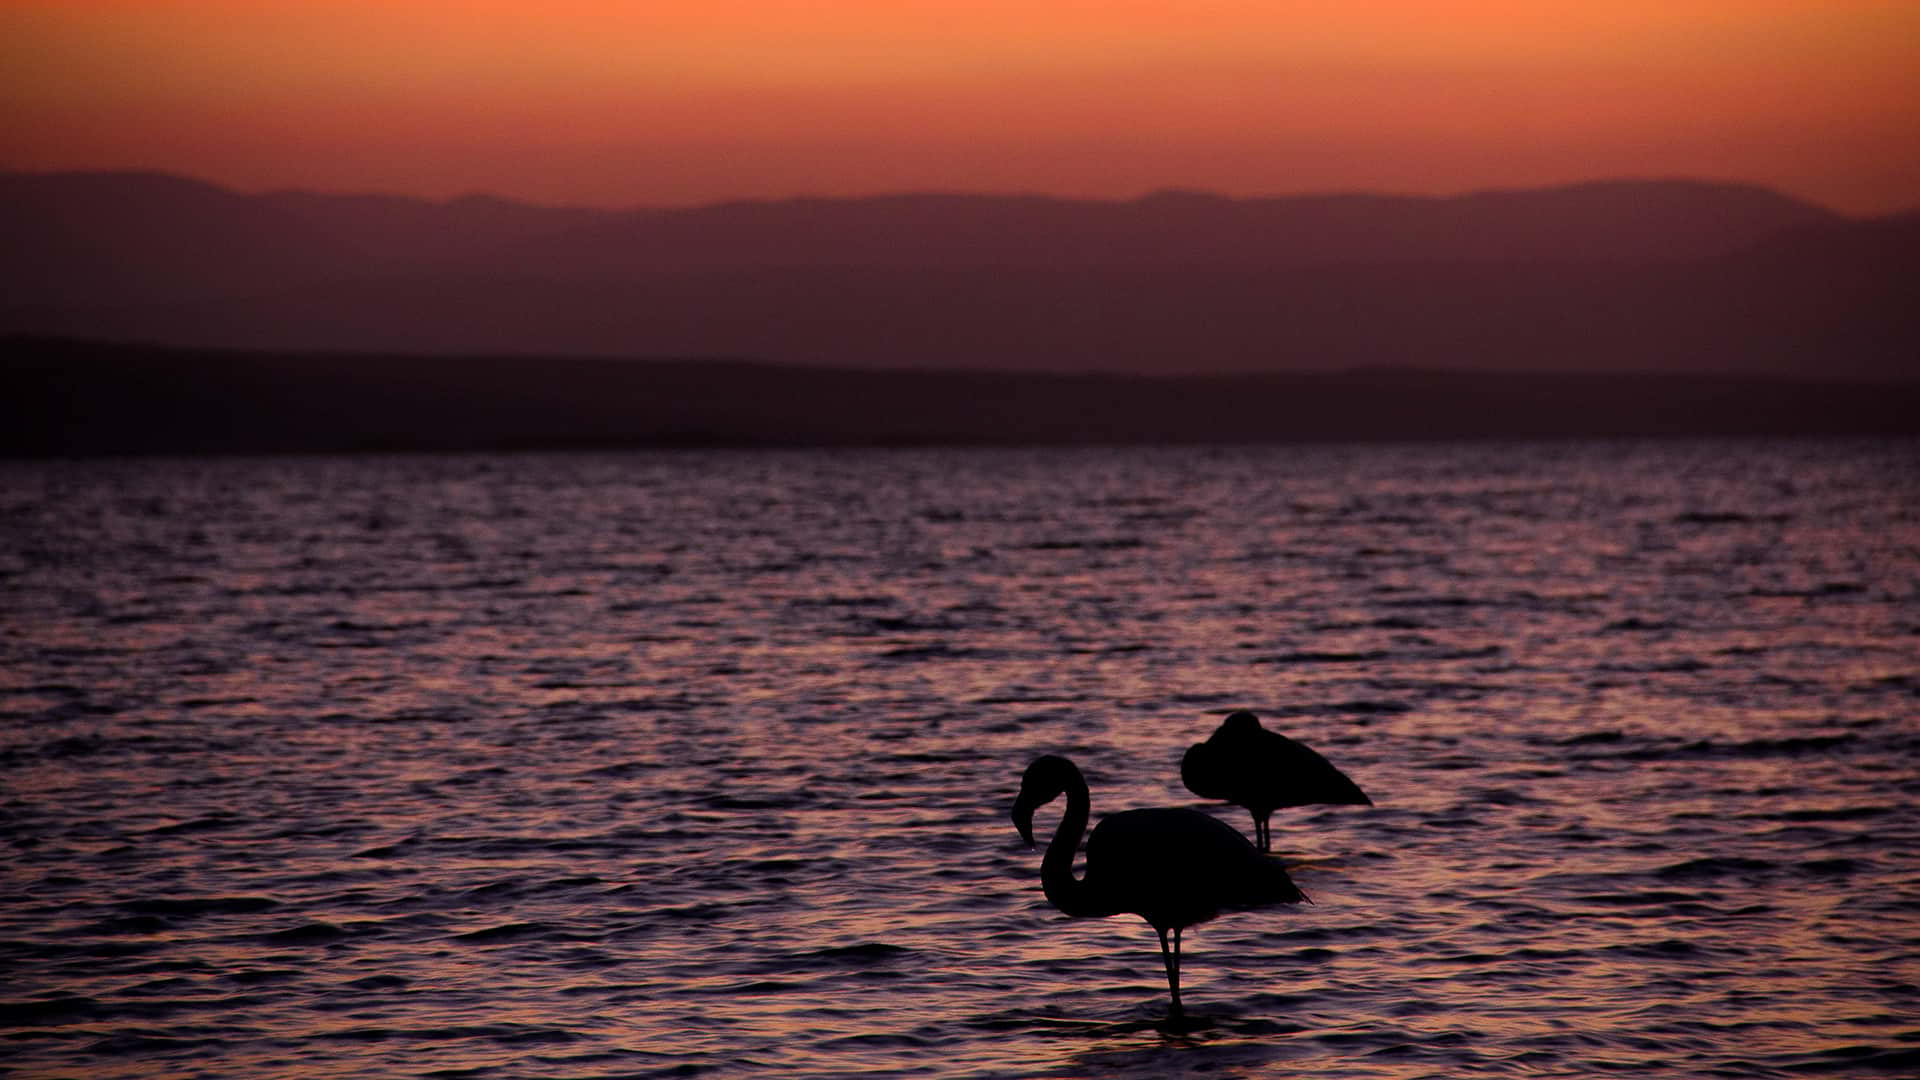 11two silouttes of flamingos in the water at dawn or dusk | Responsible Travel Peru